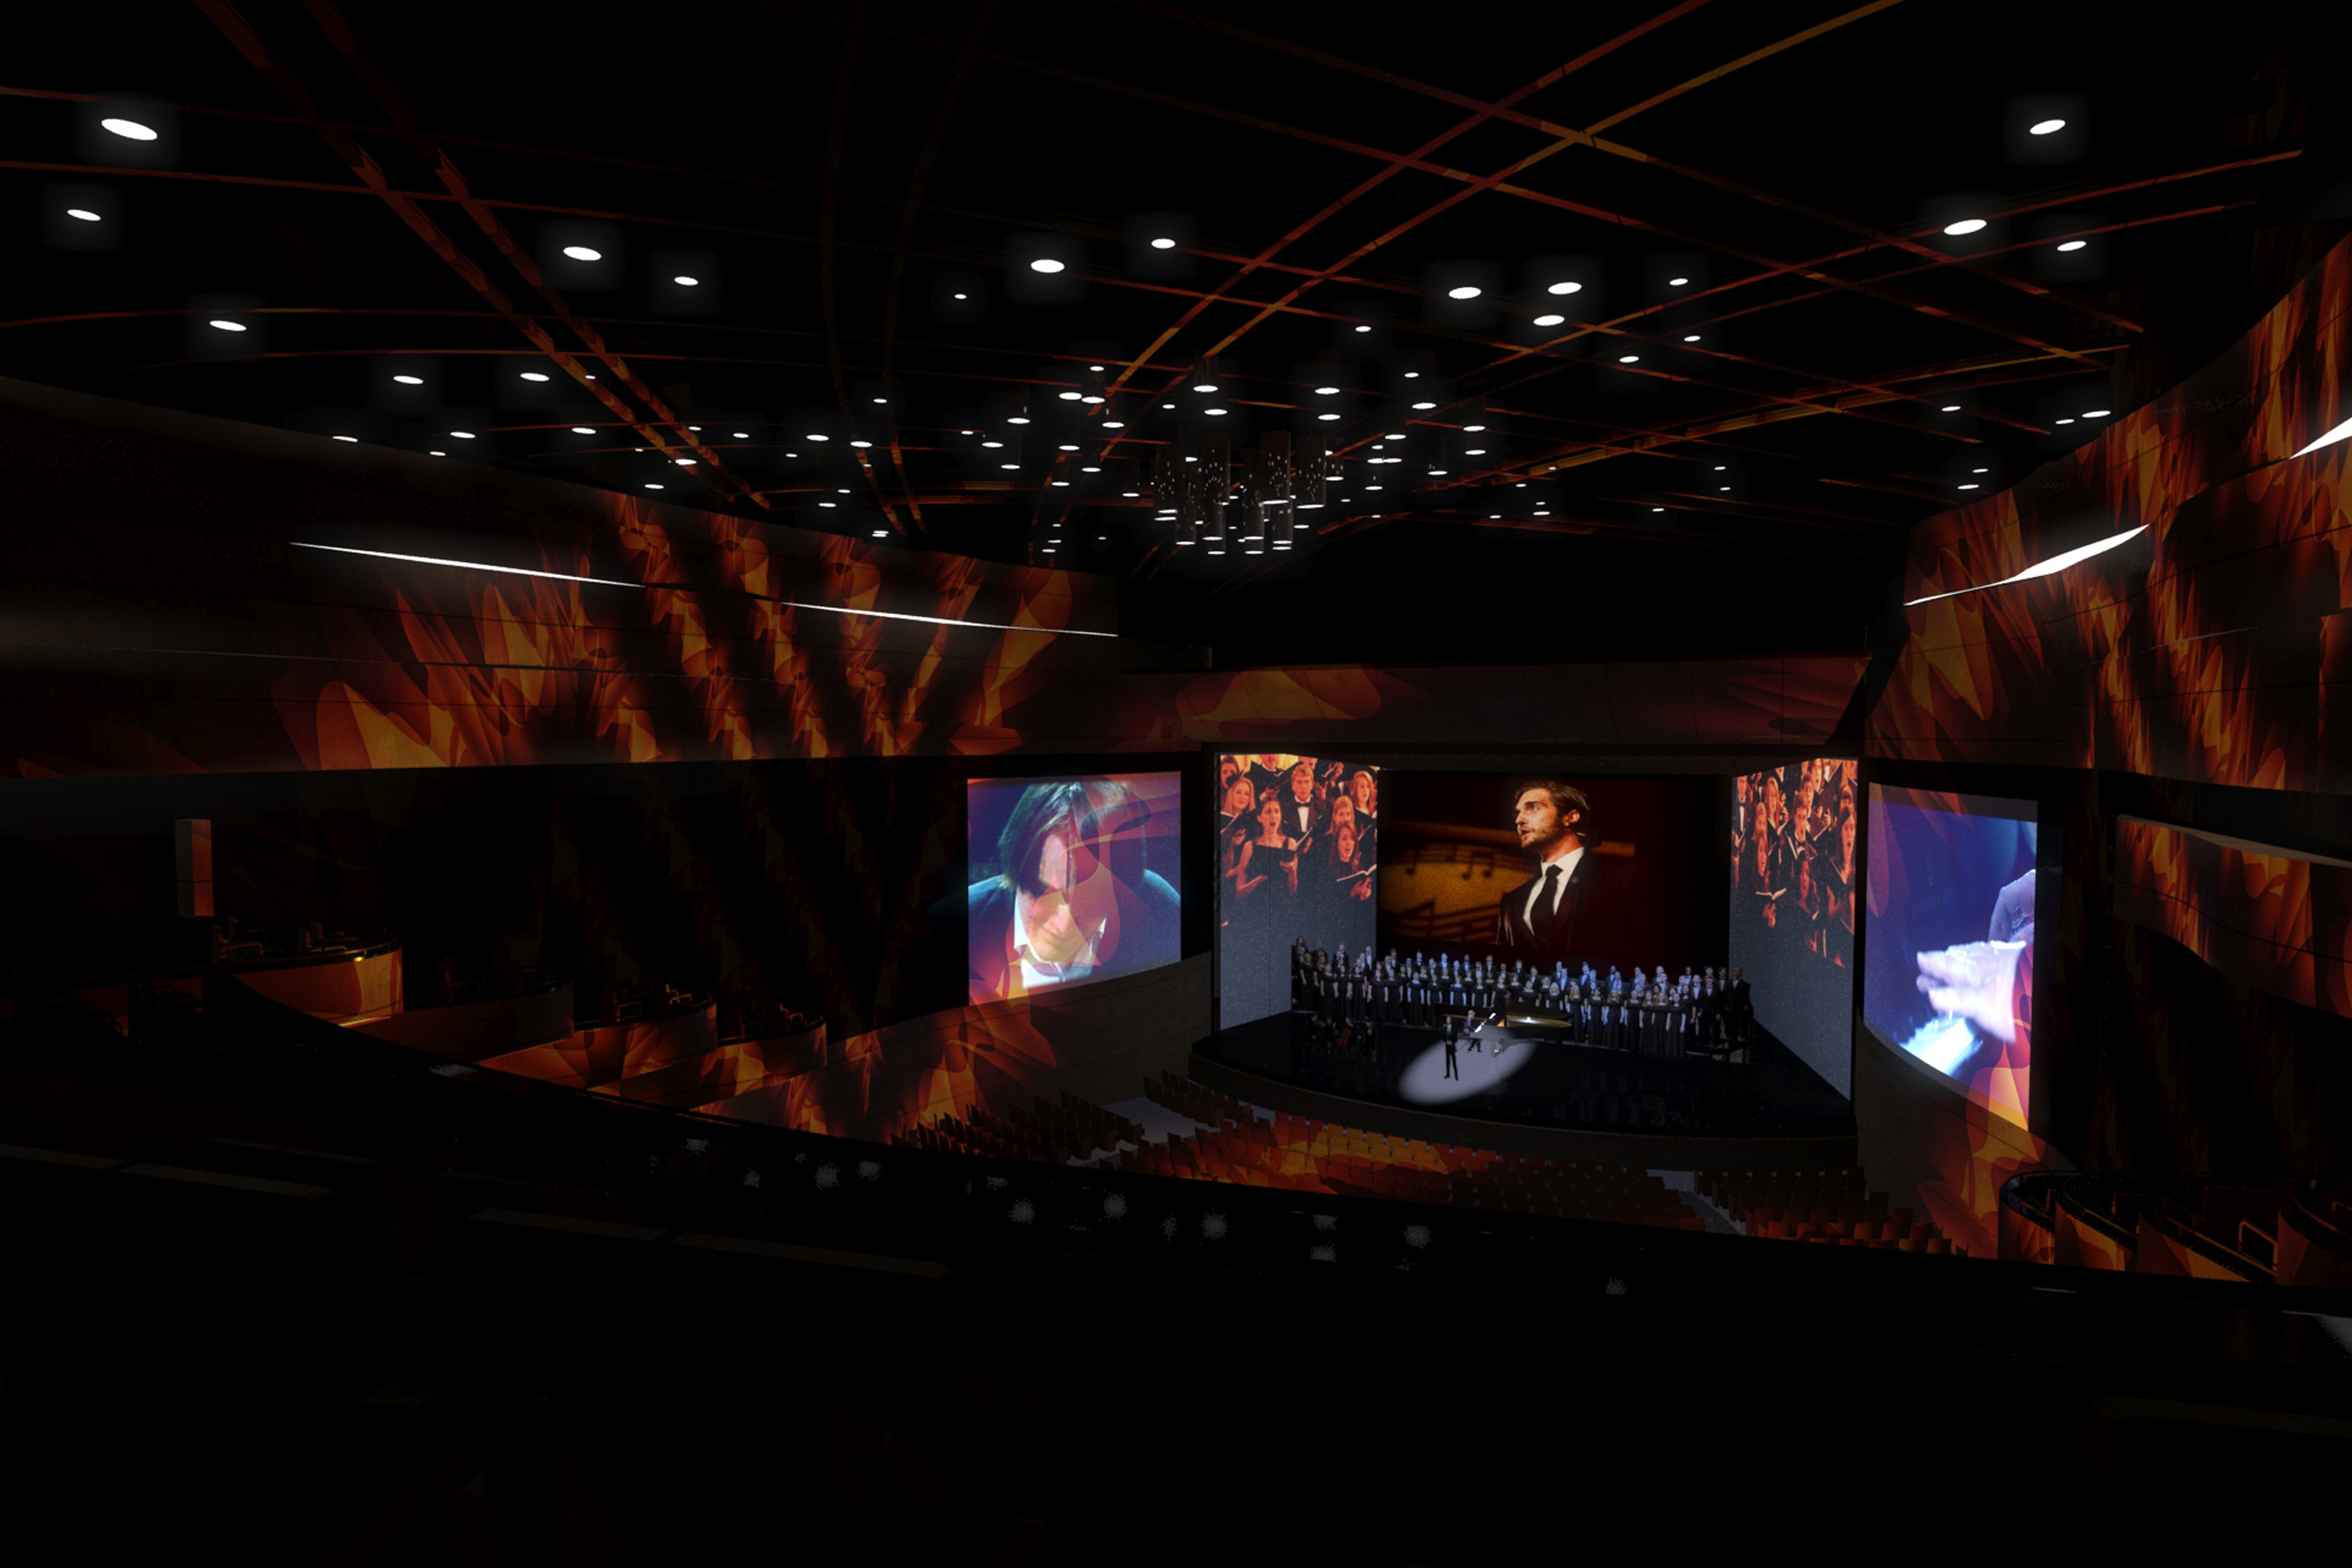 Rendering of the grand Performance Hall in The McKnight Center, complete with state-of-the-art technology